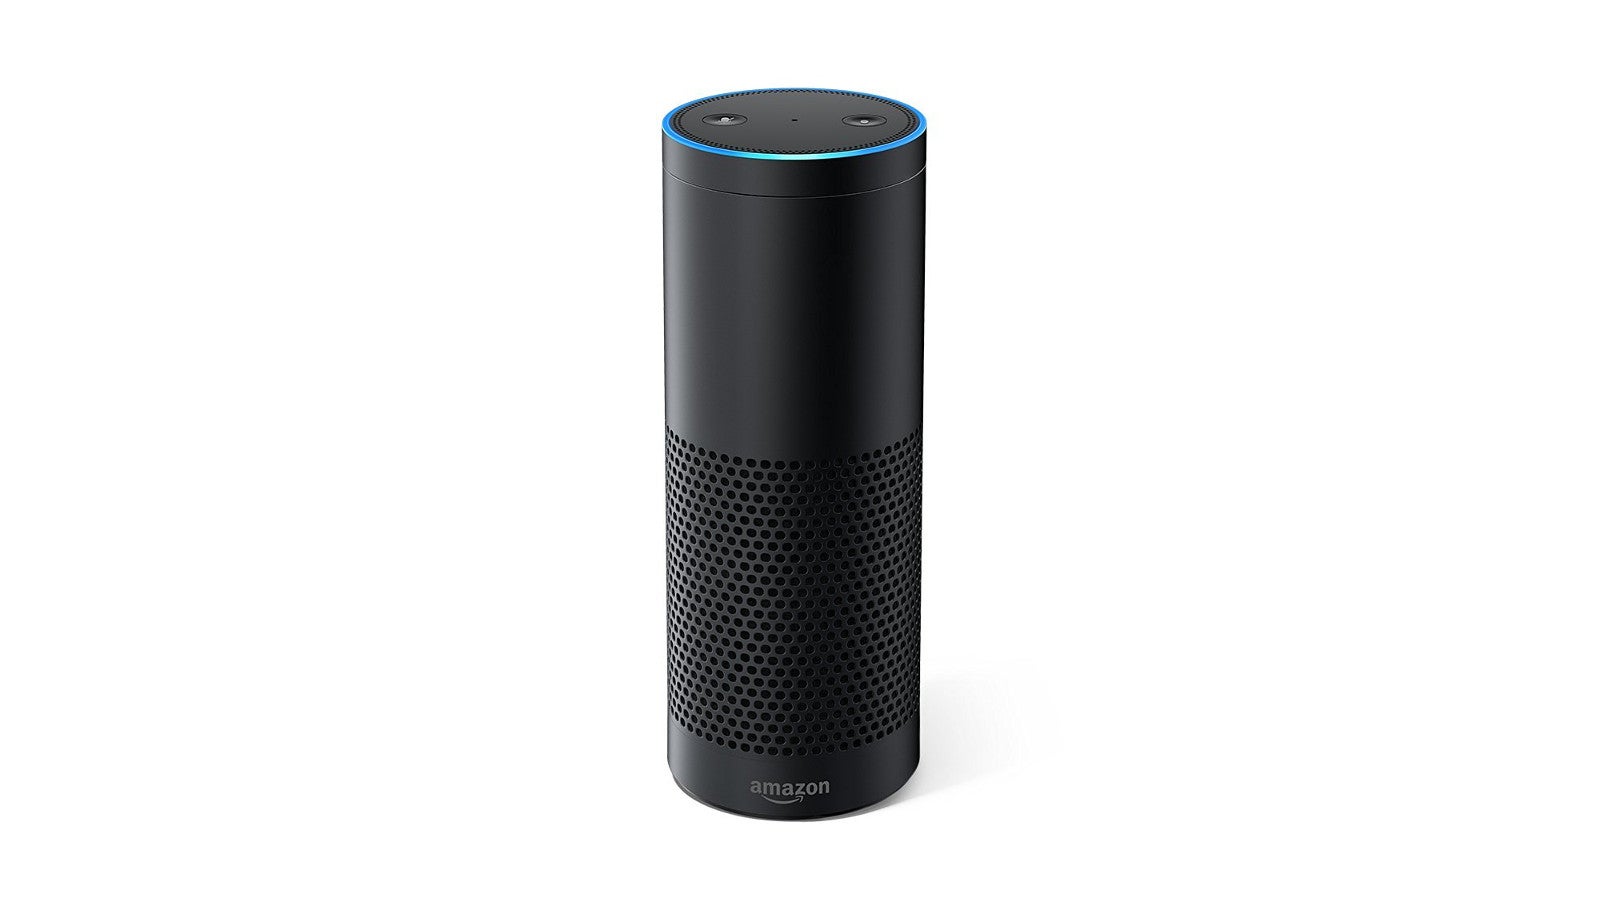 Deal: Amazon Echo gets a 44% discount, grab one for $99!